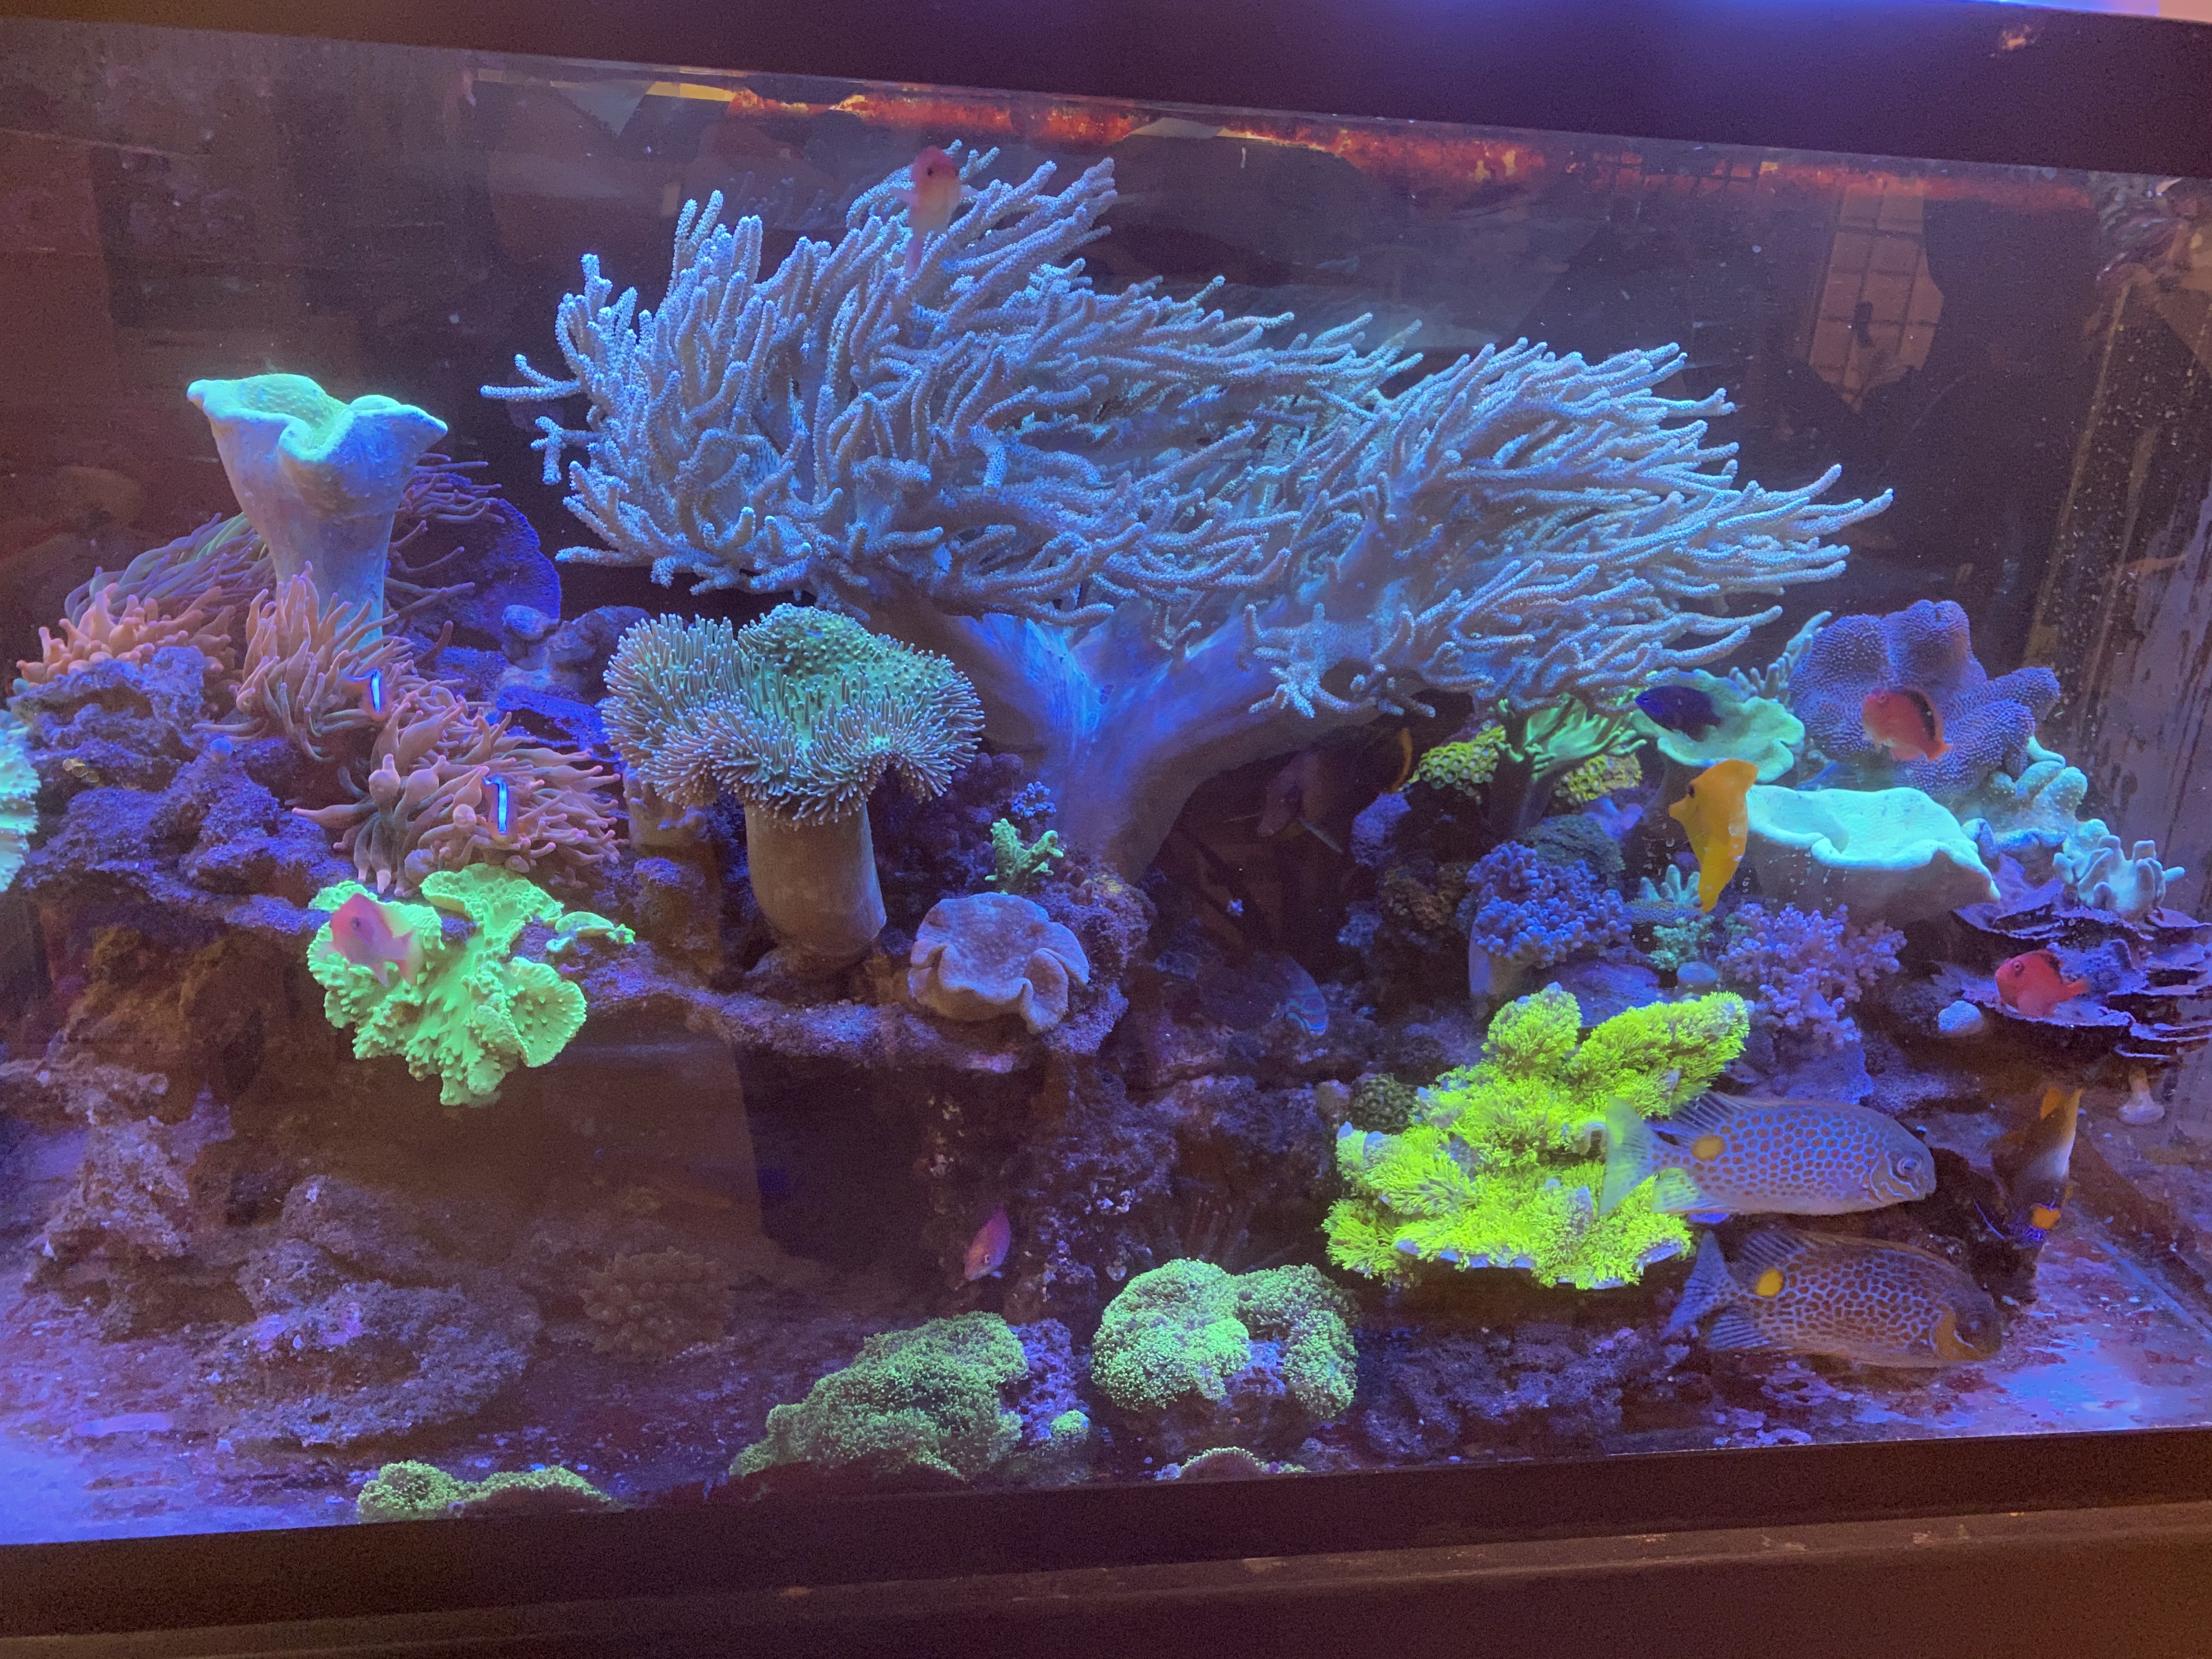 When set up properly, the flow in a soft coral tank can make the corals move to and fro just as they would on the reef.